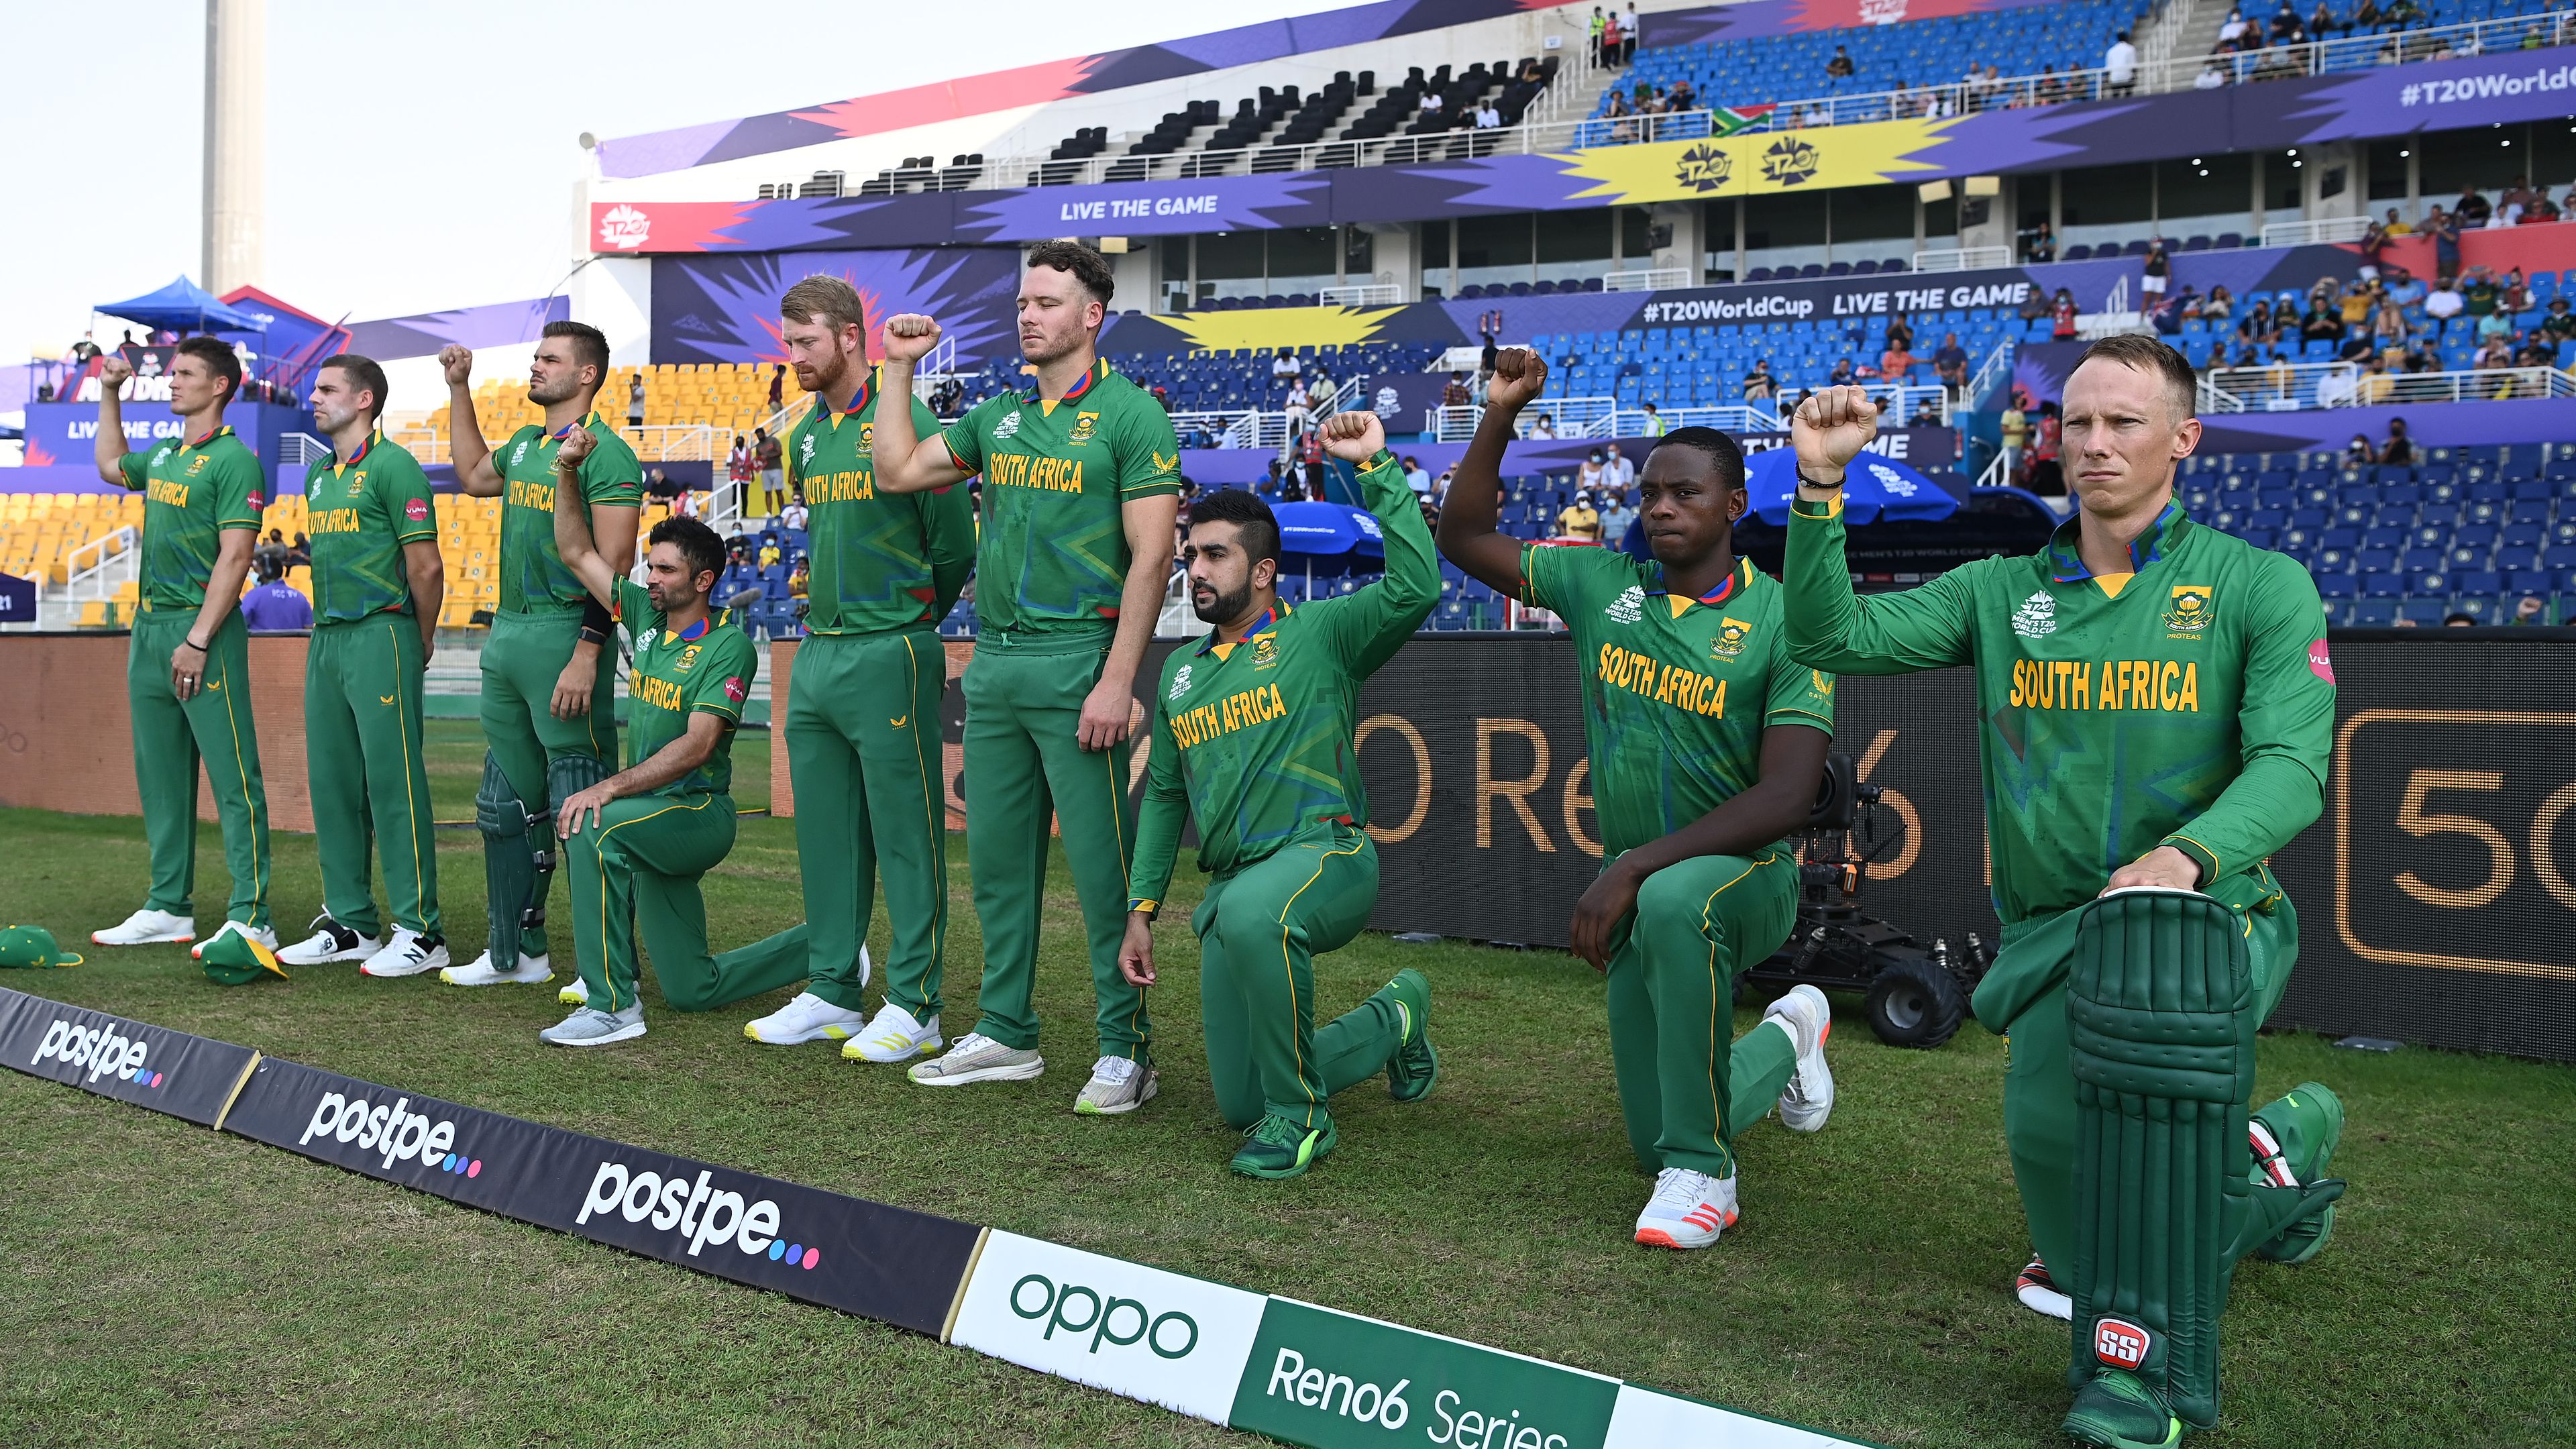 Team photo exposes split in South African T20 World Cup over BLM protest